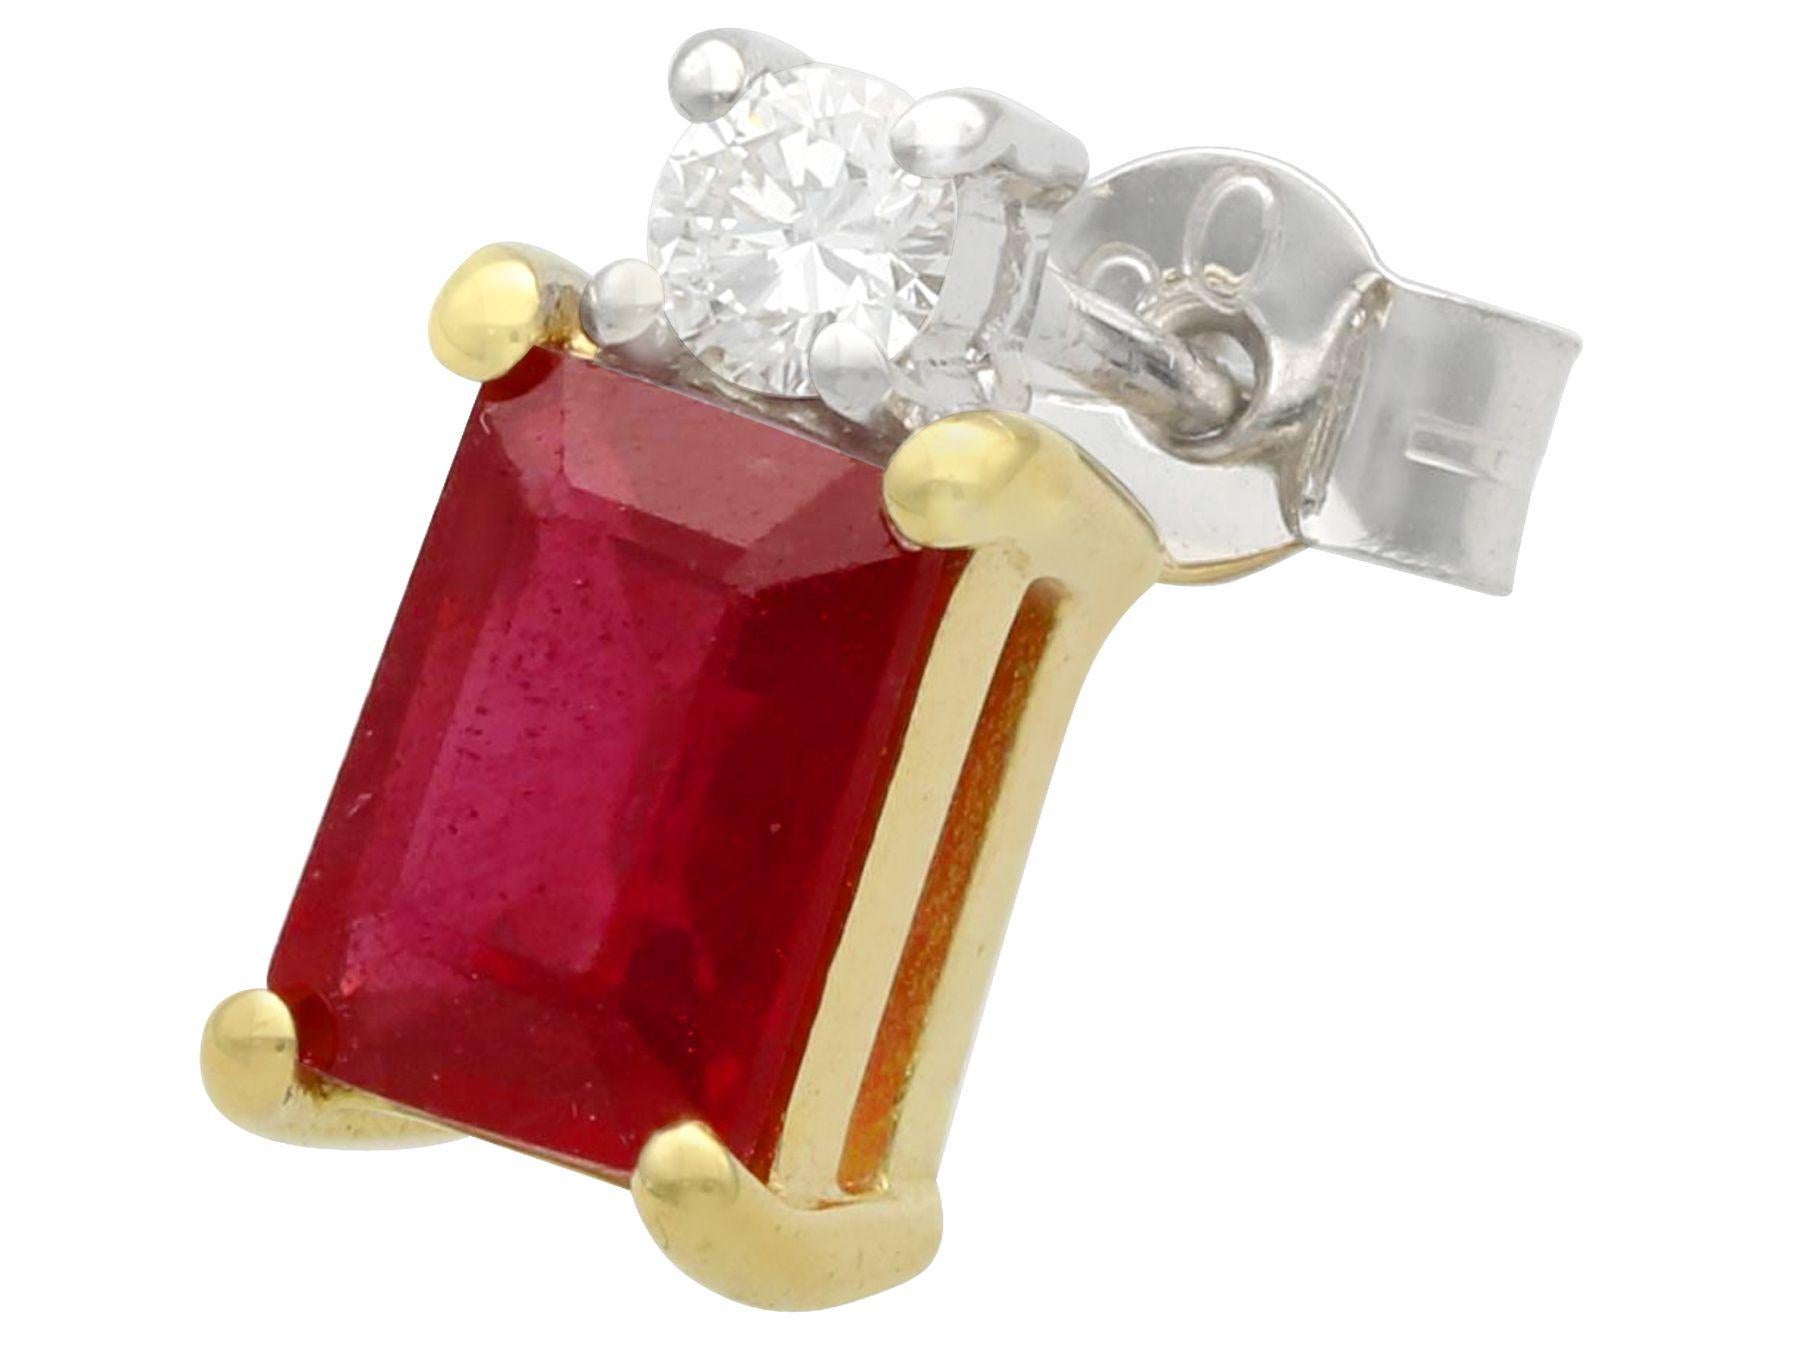 A fine and impressive pair of emerald cut 2.45 carat ruby and 0.18 carat diamond, 18 karat white gold and 18 karat yellow gold earrings; part of our diverse gemstone jewelry collections

These fine and impressive ruby earrings have been crafted in